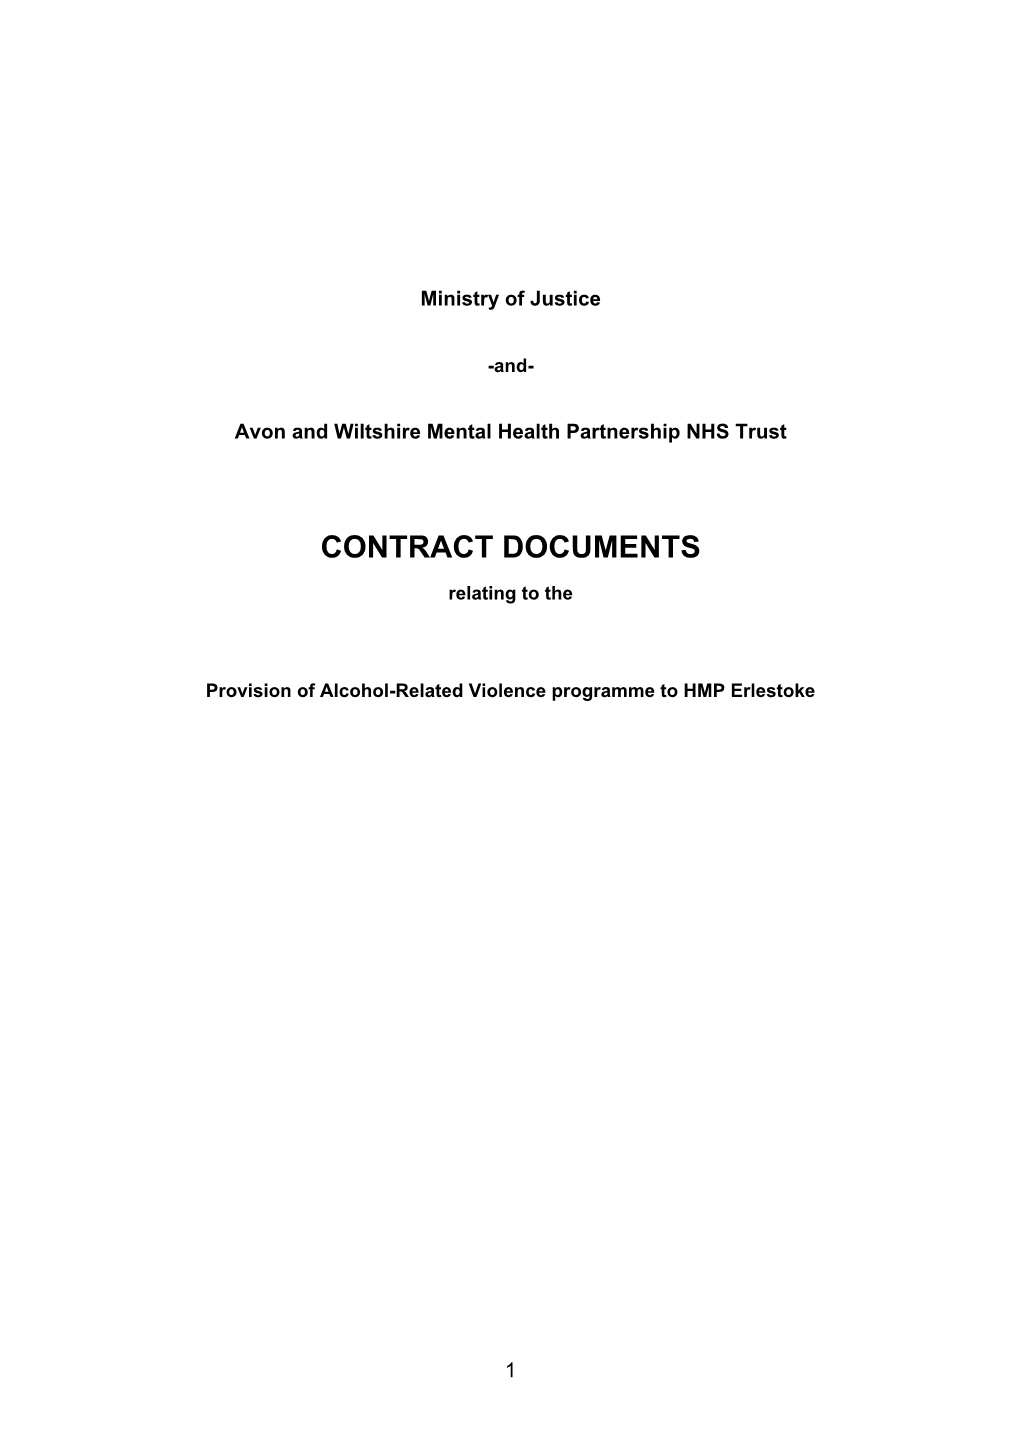 Model General Terms and Conditions of Contract